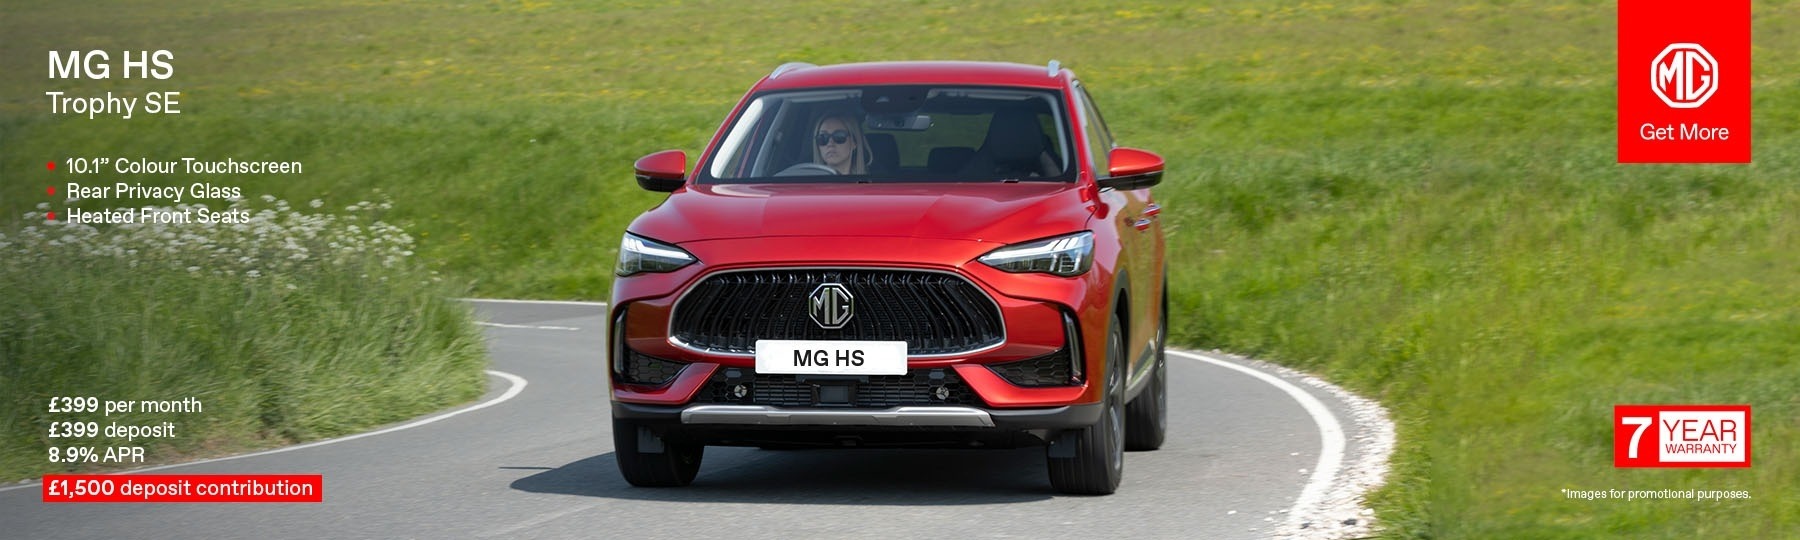 New MG HS New Car Offer